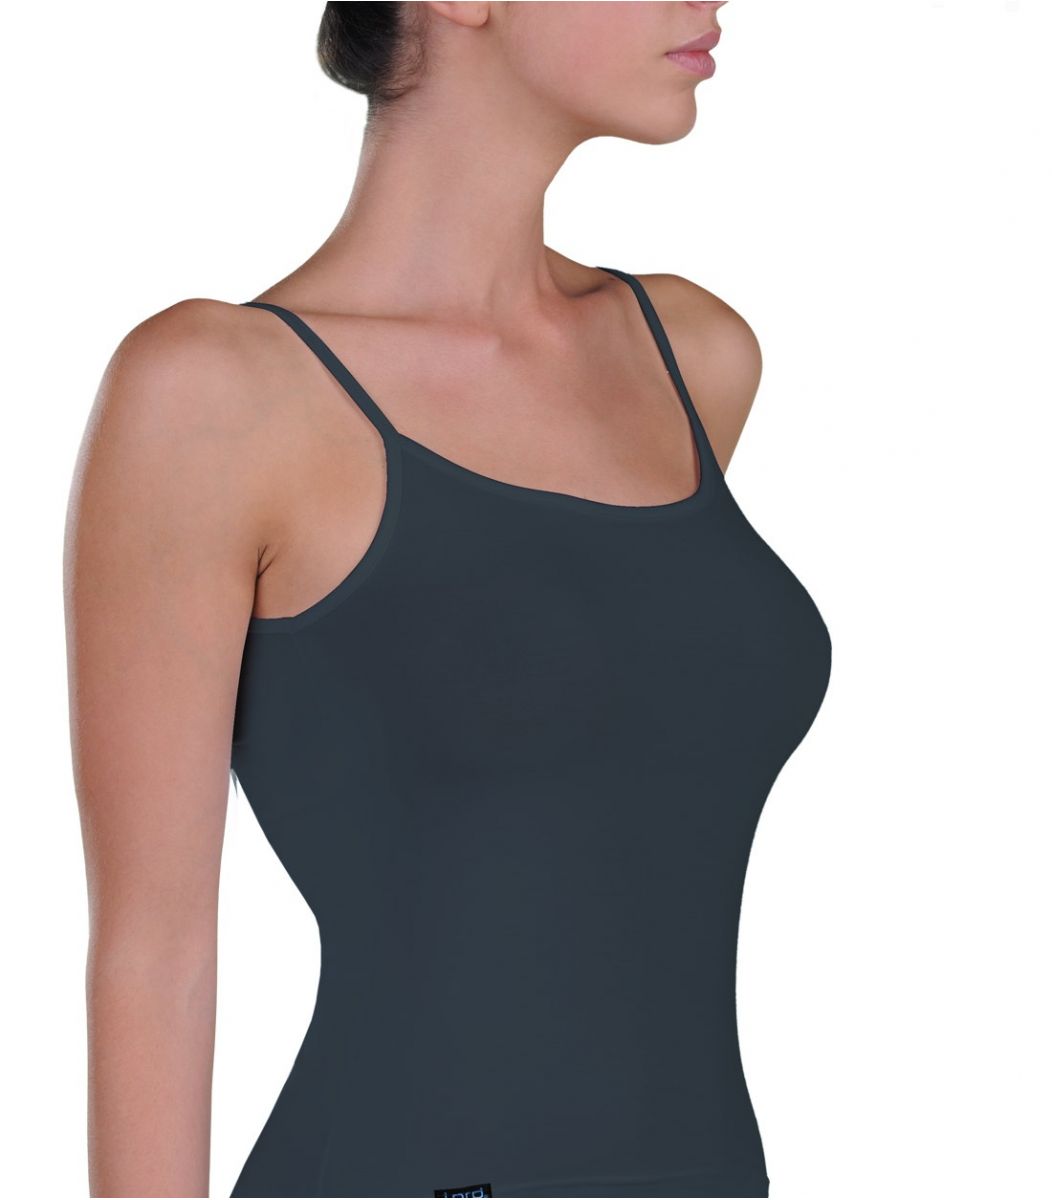 Camisole, micromodal, charcoal